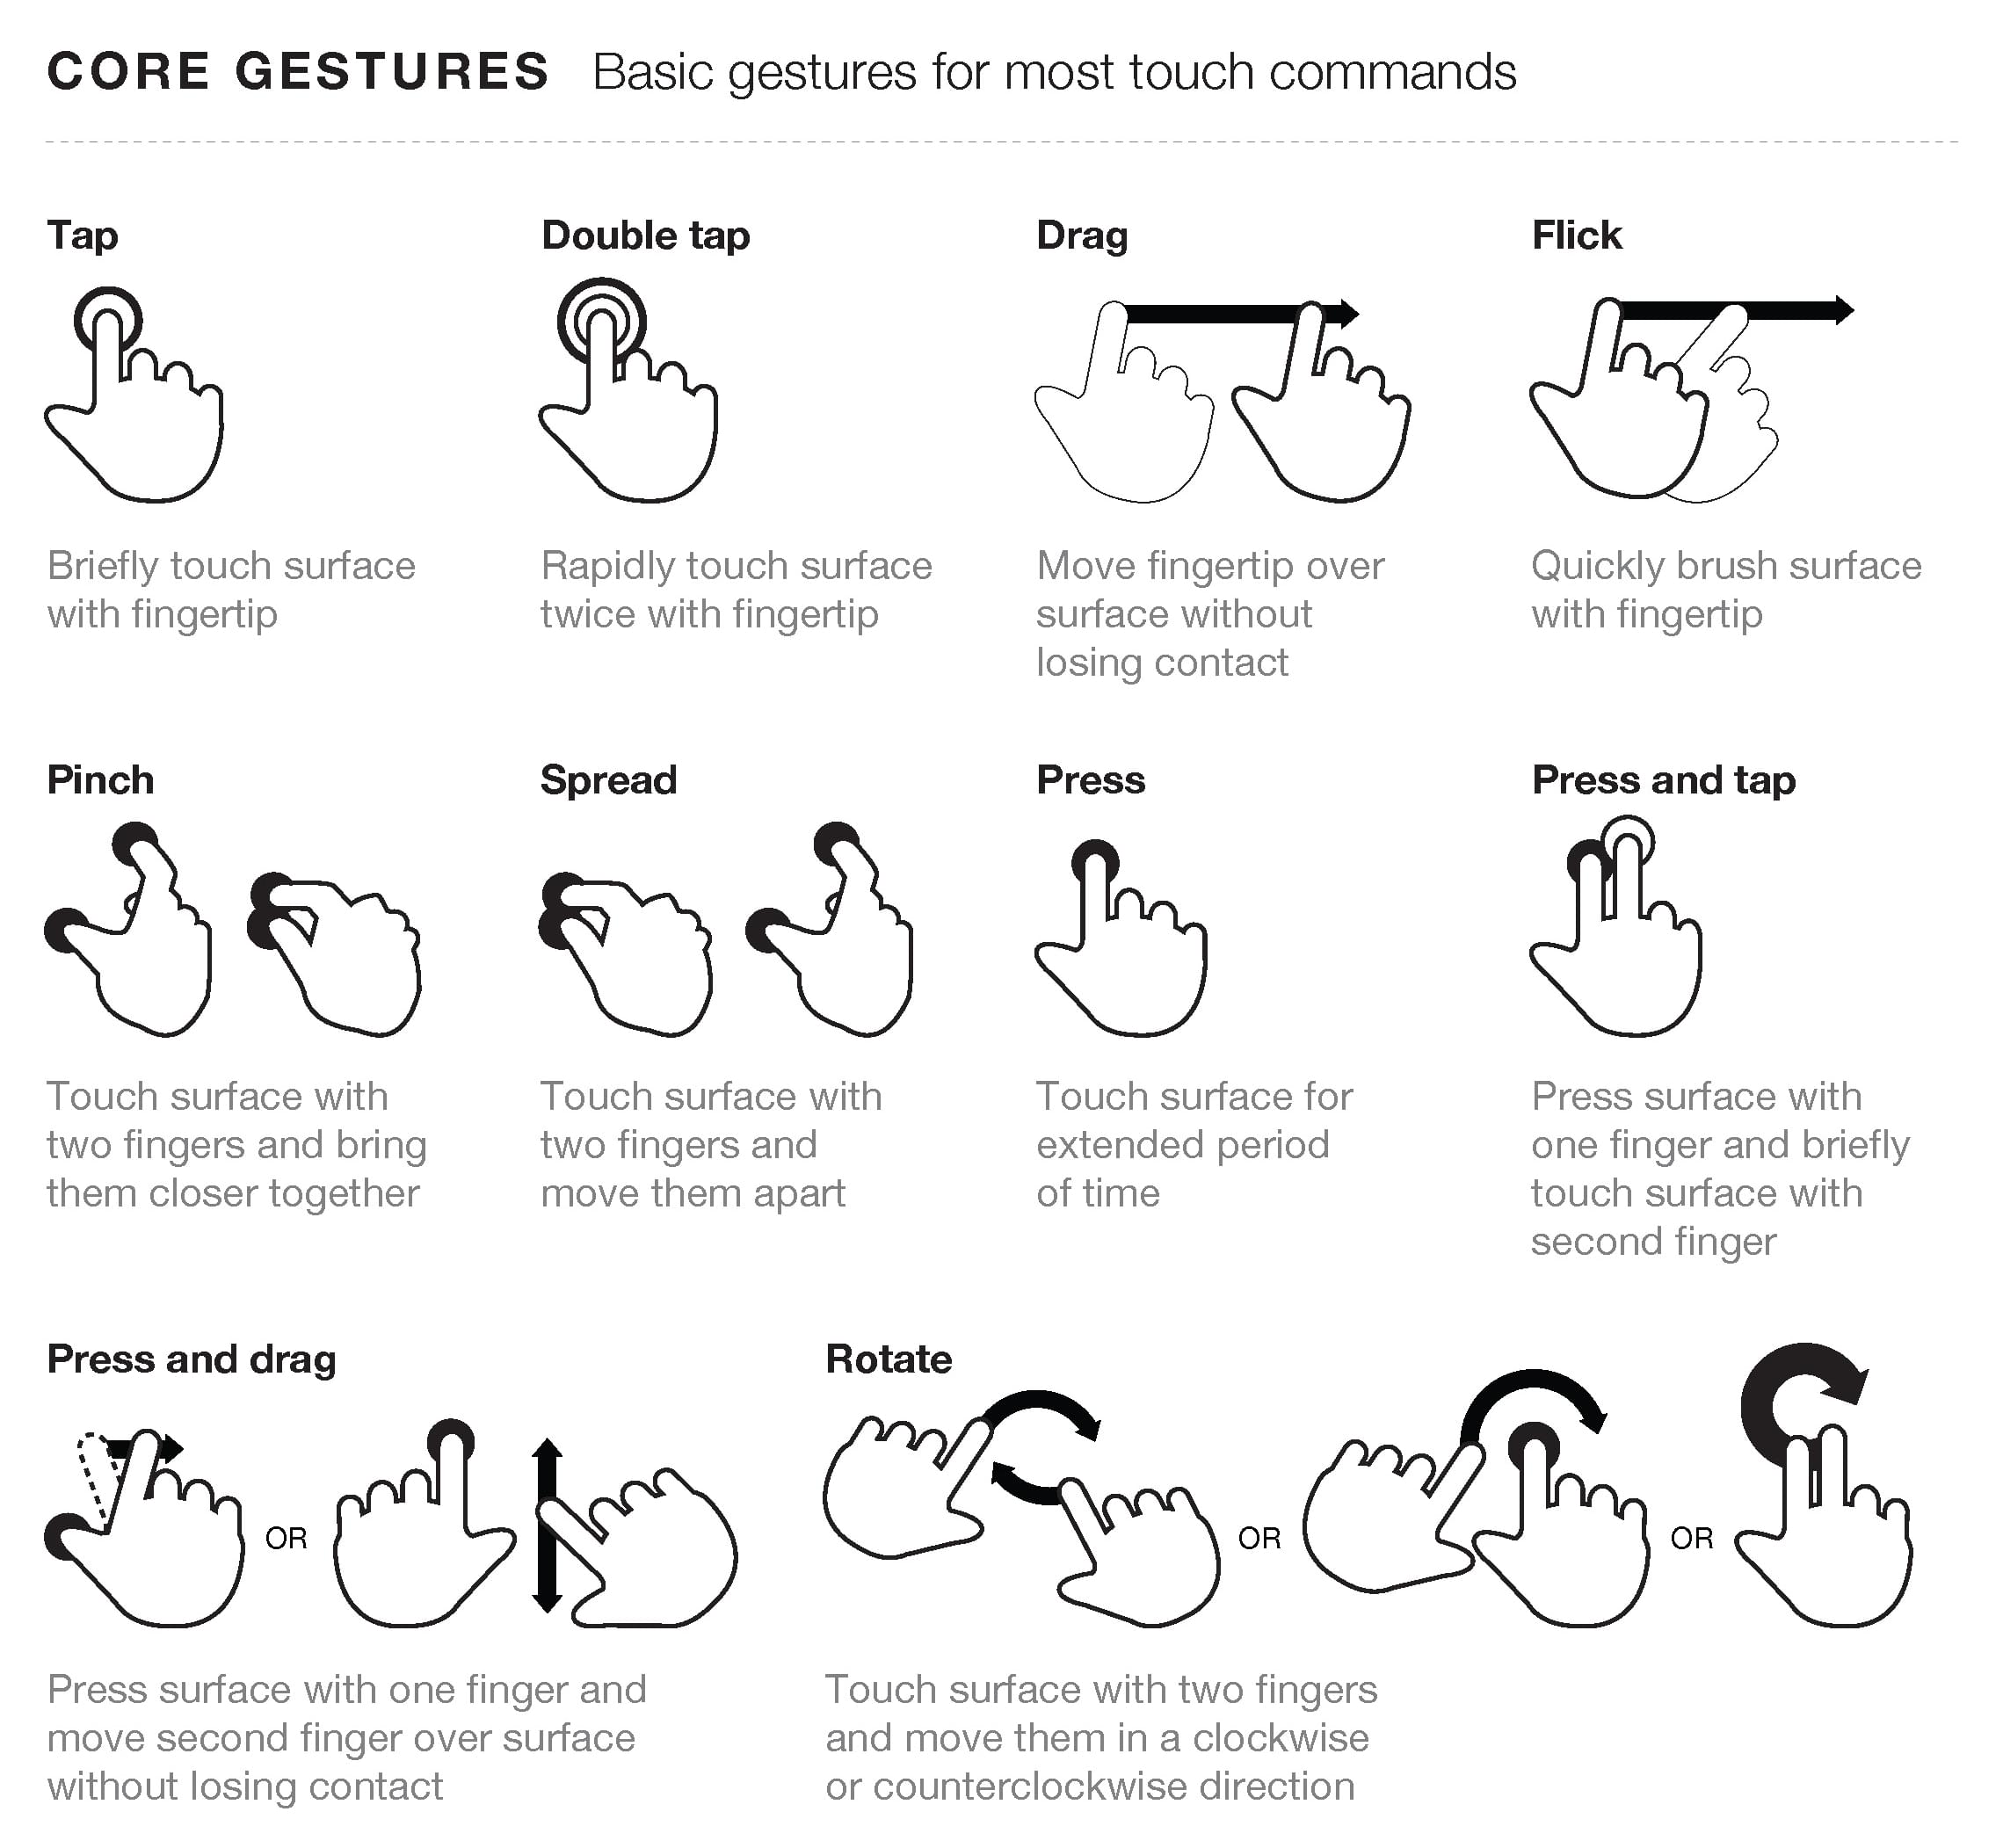 An illustration of various gesture-based interactions such as touch, double-tap, pinch